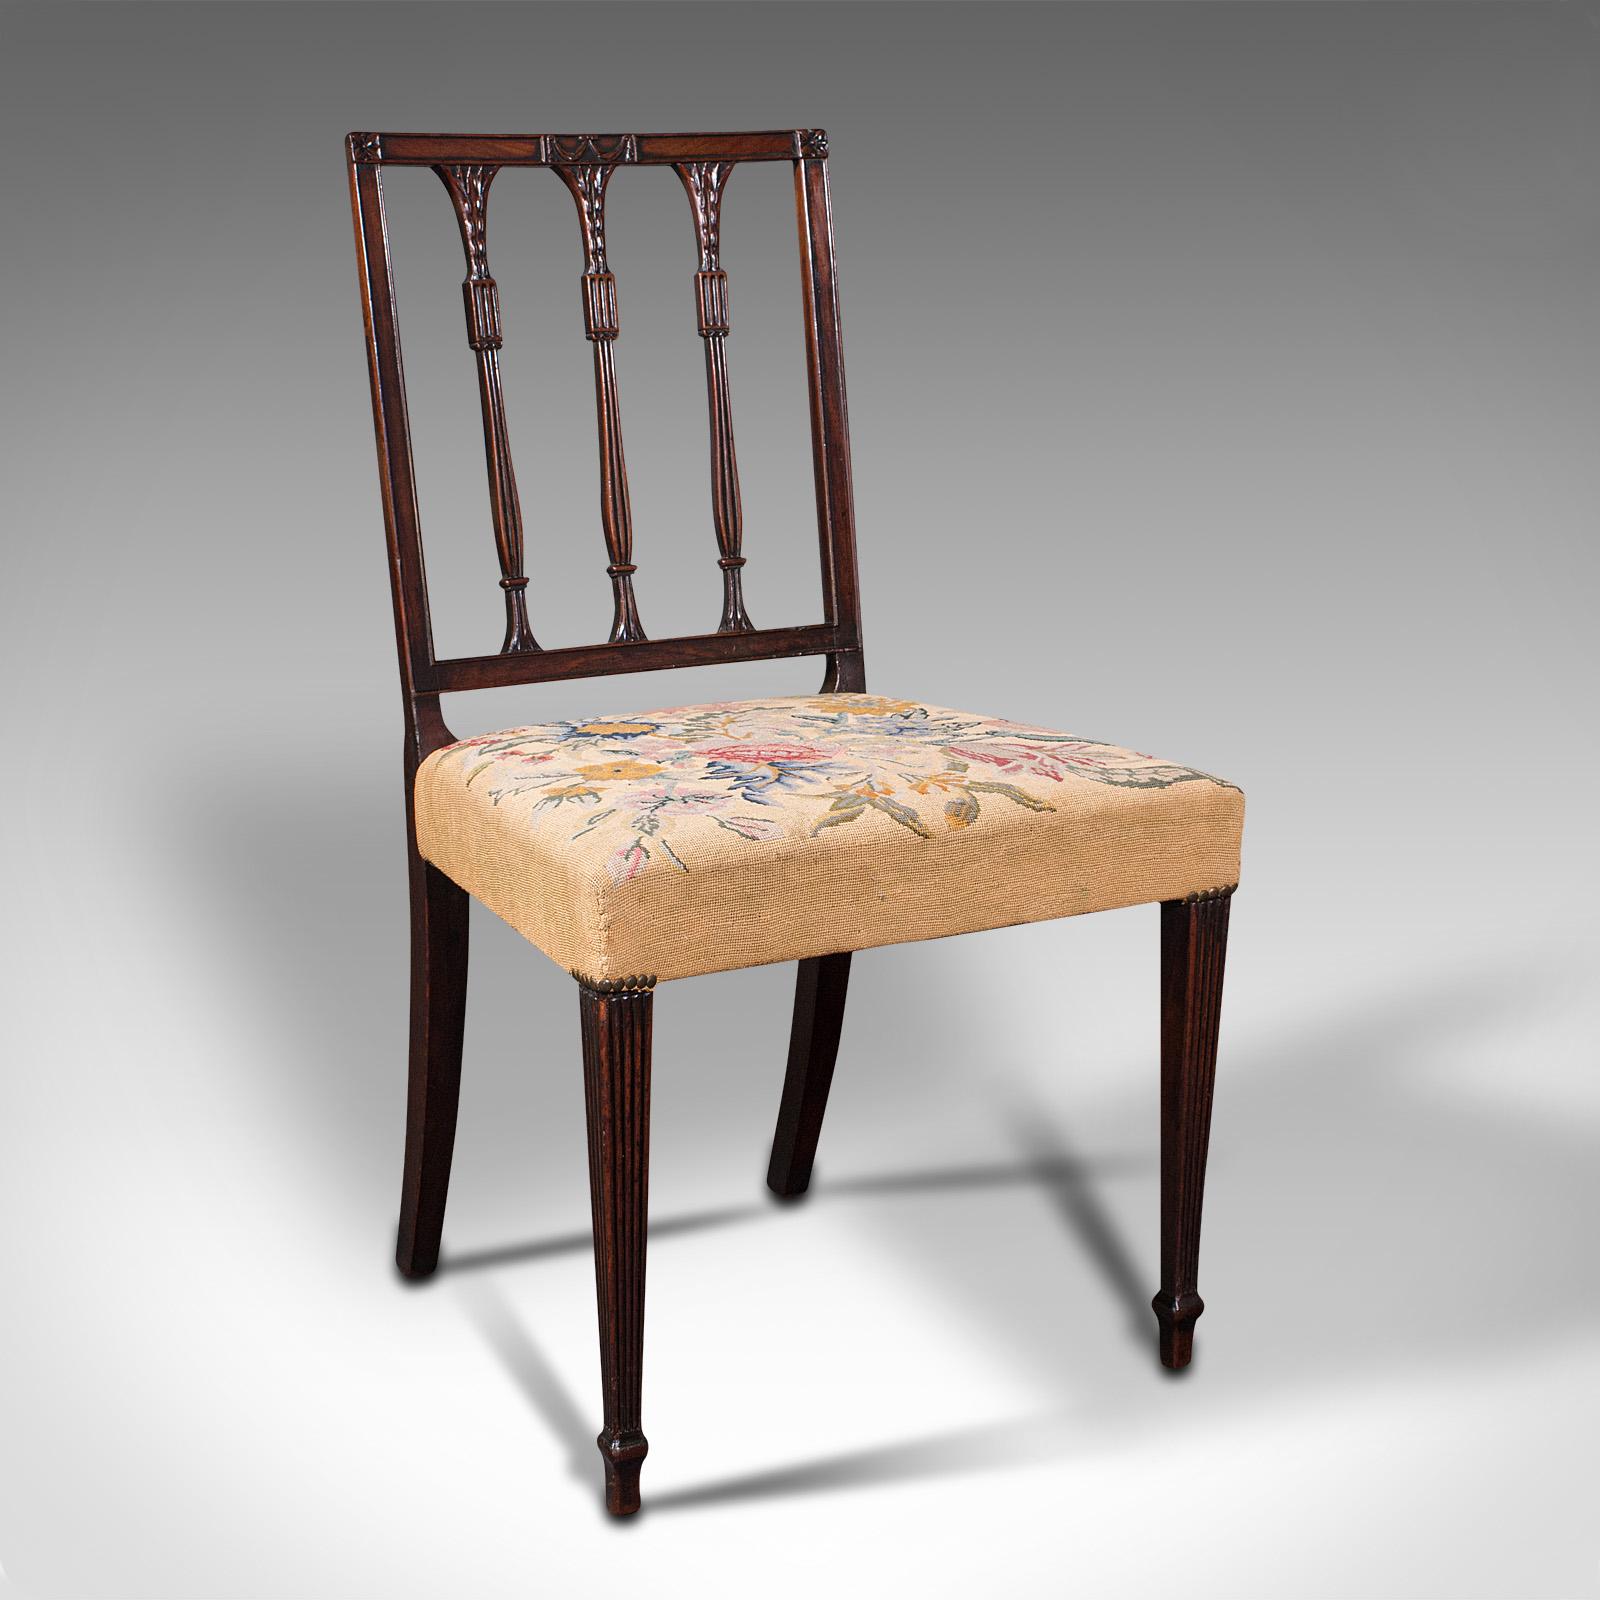 British Set of 4 Antique Embroidered Chairs, English, Dining Seat, After Sheraton, 1780